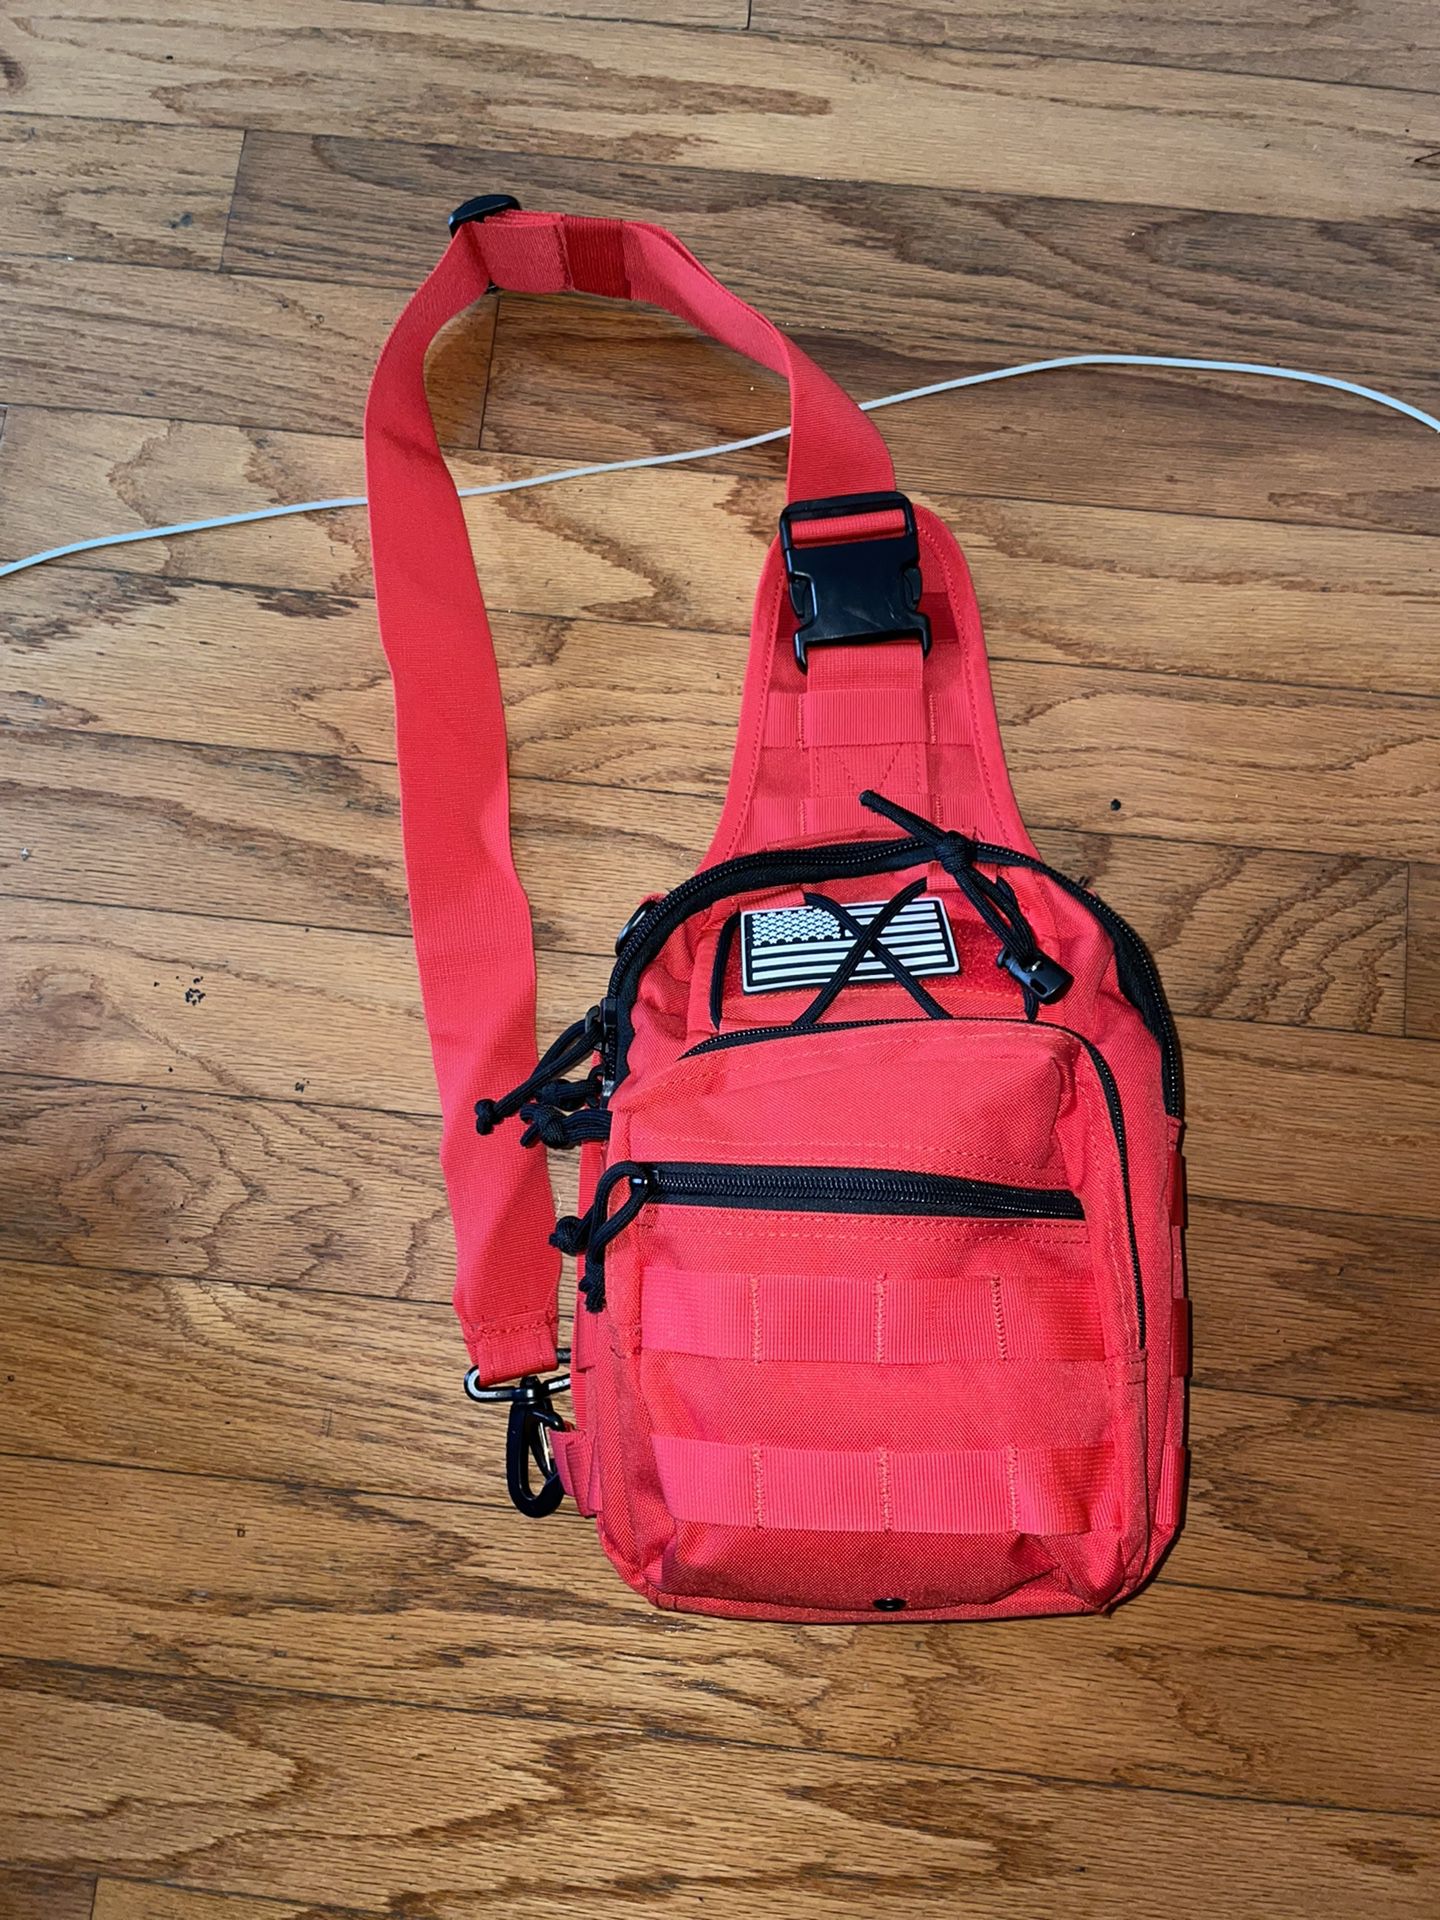 Red Shoulder Bag For Small Carry 